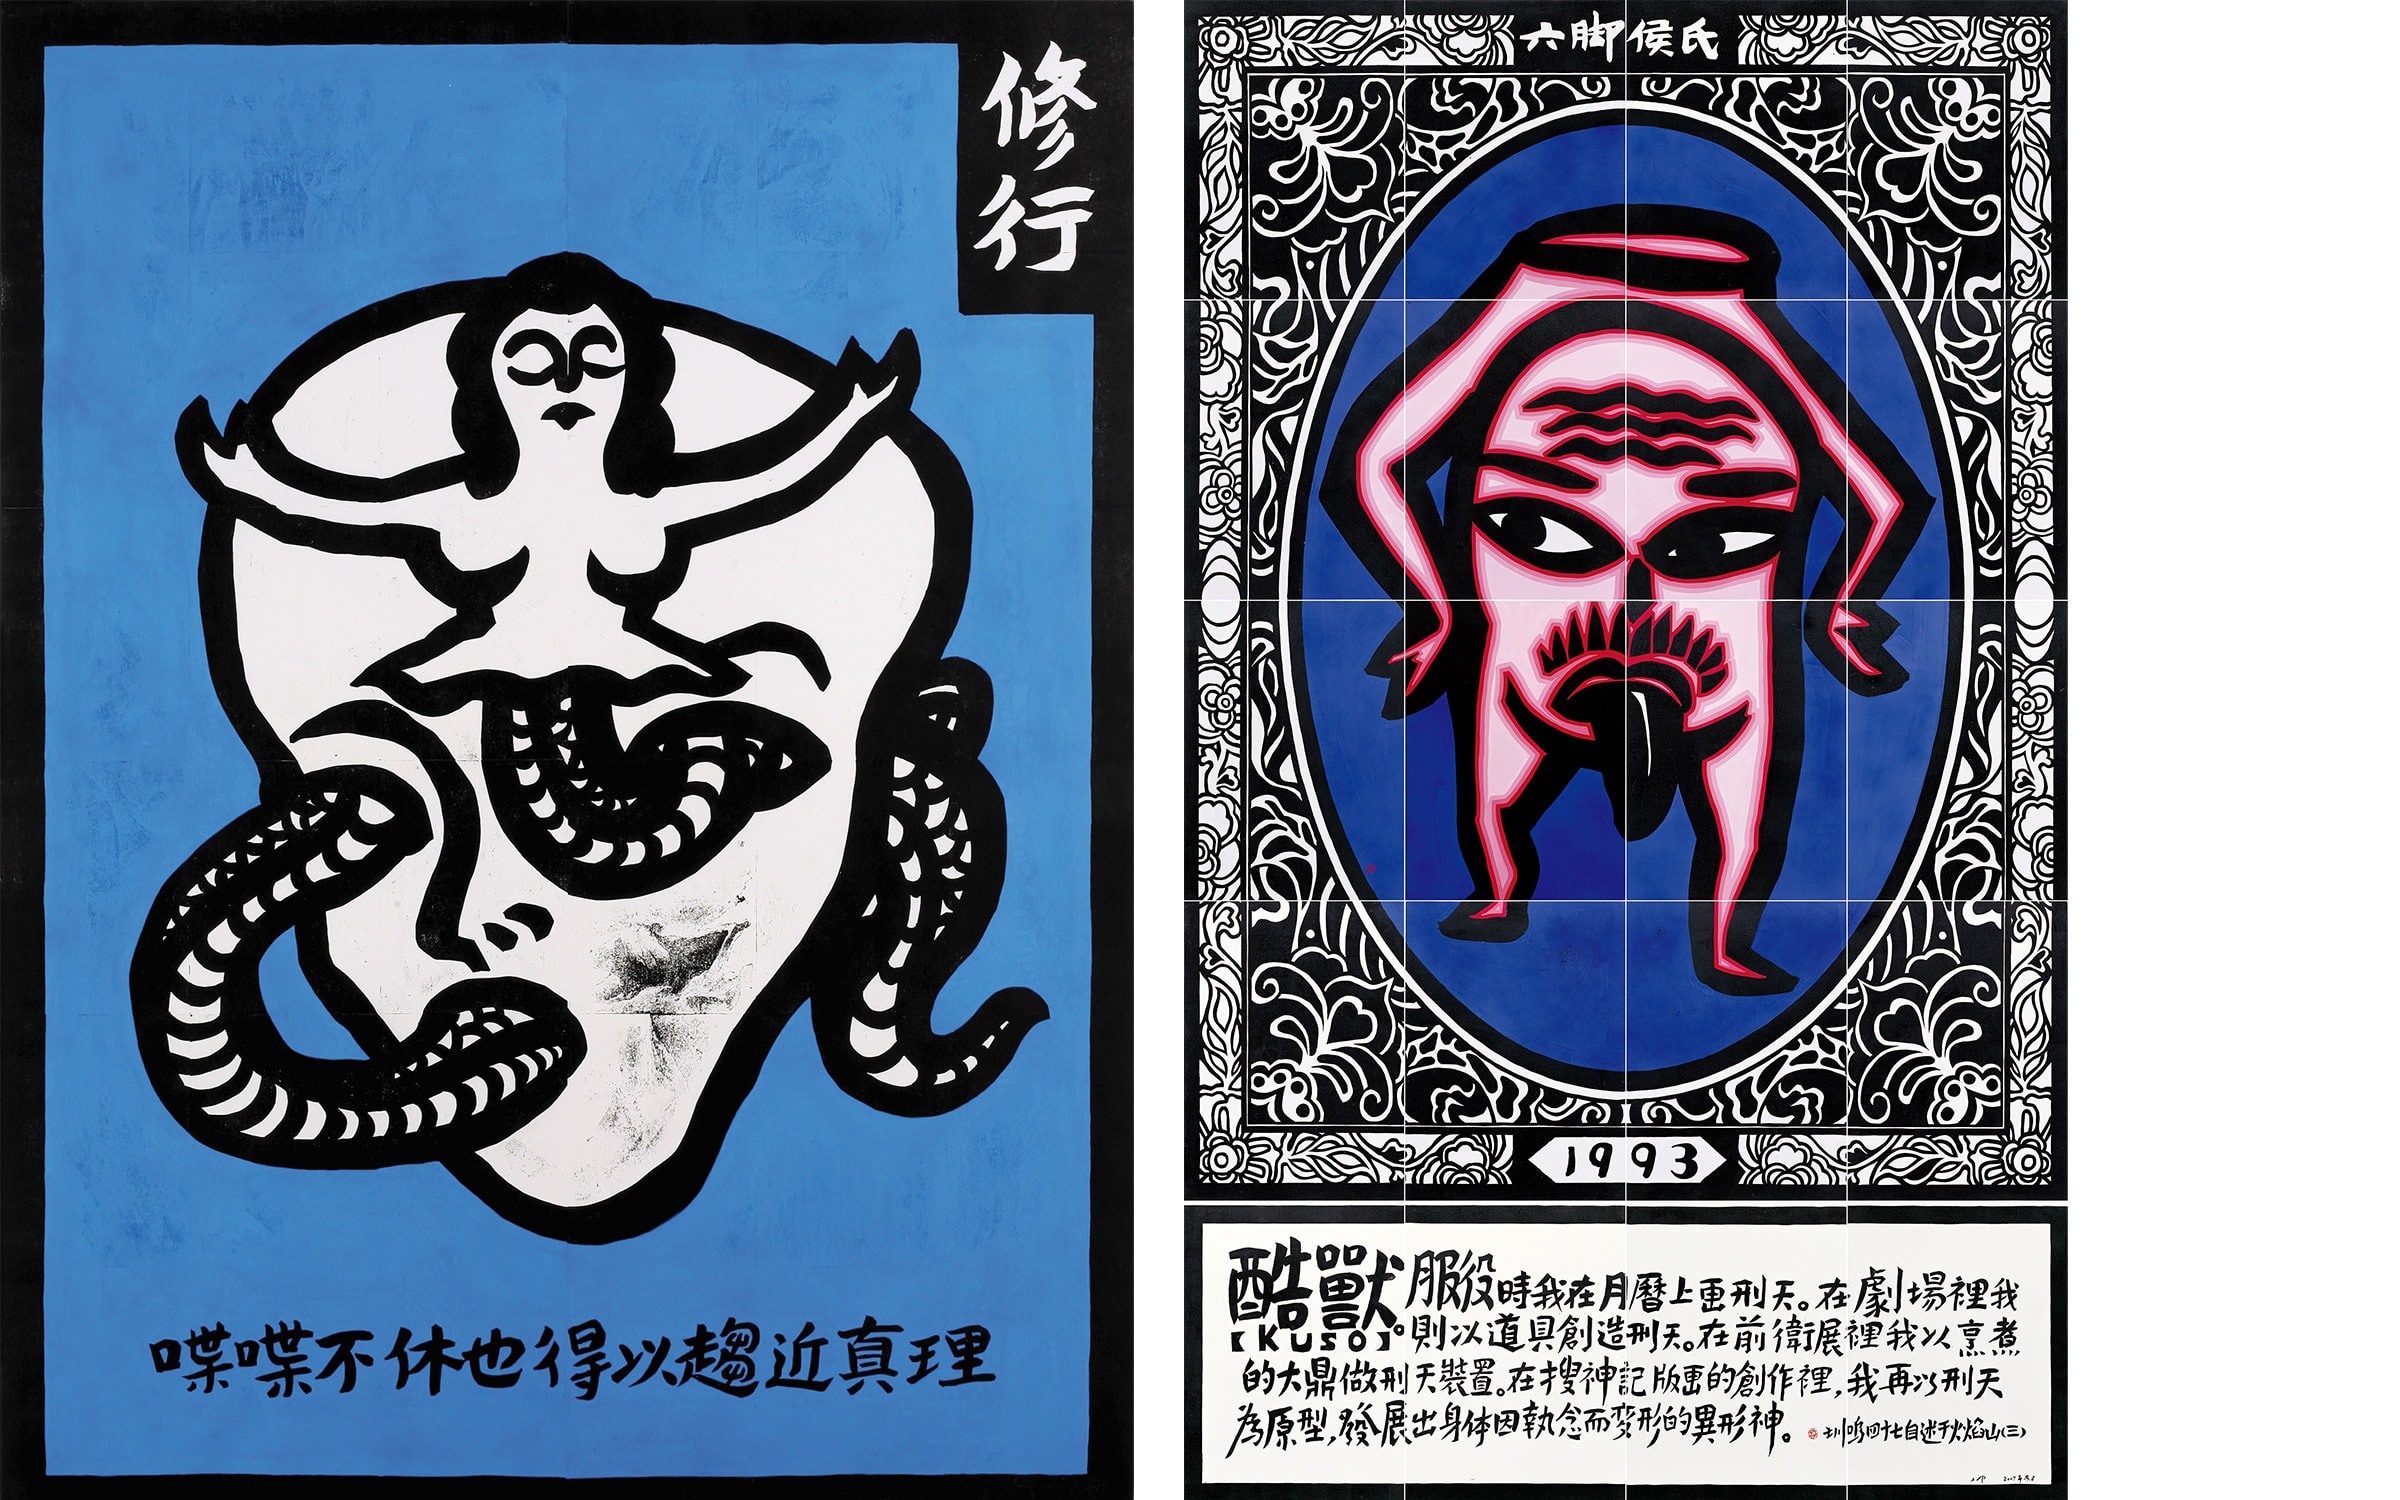 Left: ou Chun-Ming, Retreat, Journal by Pillow (Large set), 2006. Right: KUSO, Confession by Chun-ming at Age 47, 2007. Courtesy of the artist.